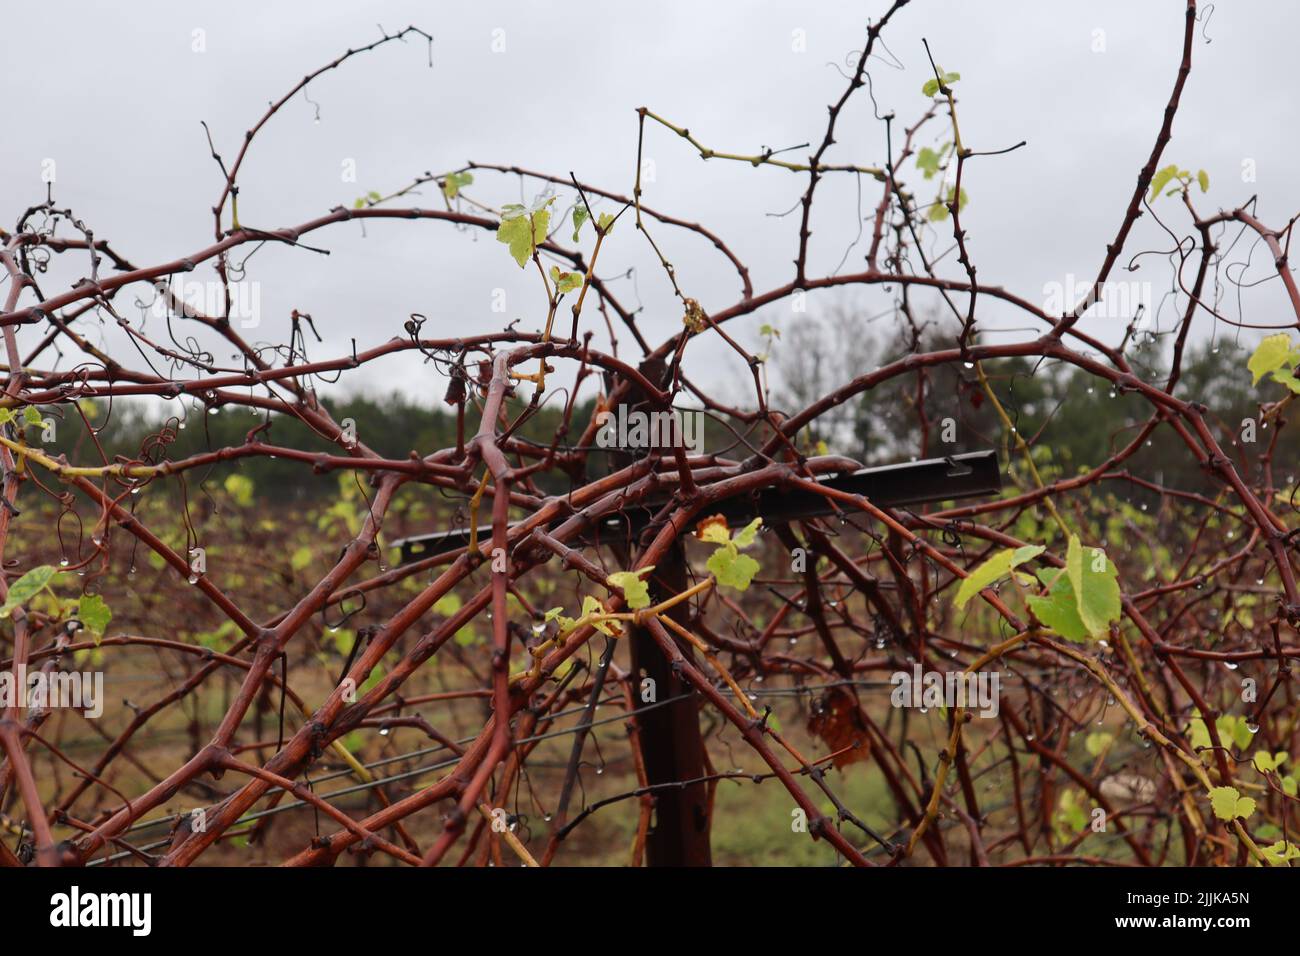 A view of vineyards with budding leaves in Texas Hill Country with dense thin branches on foreground Stock Photo